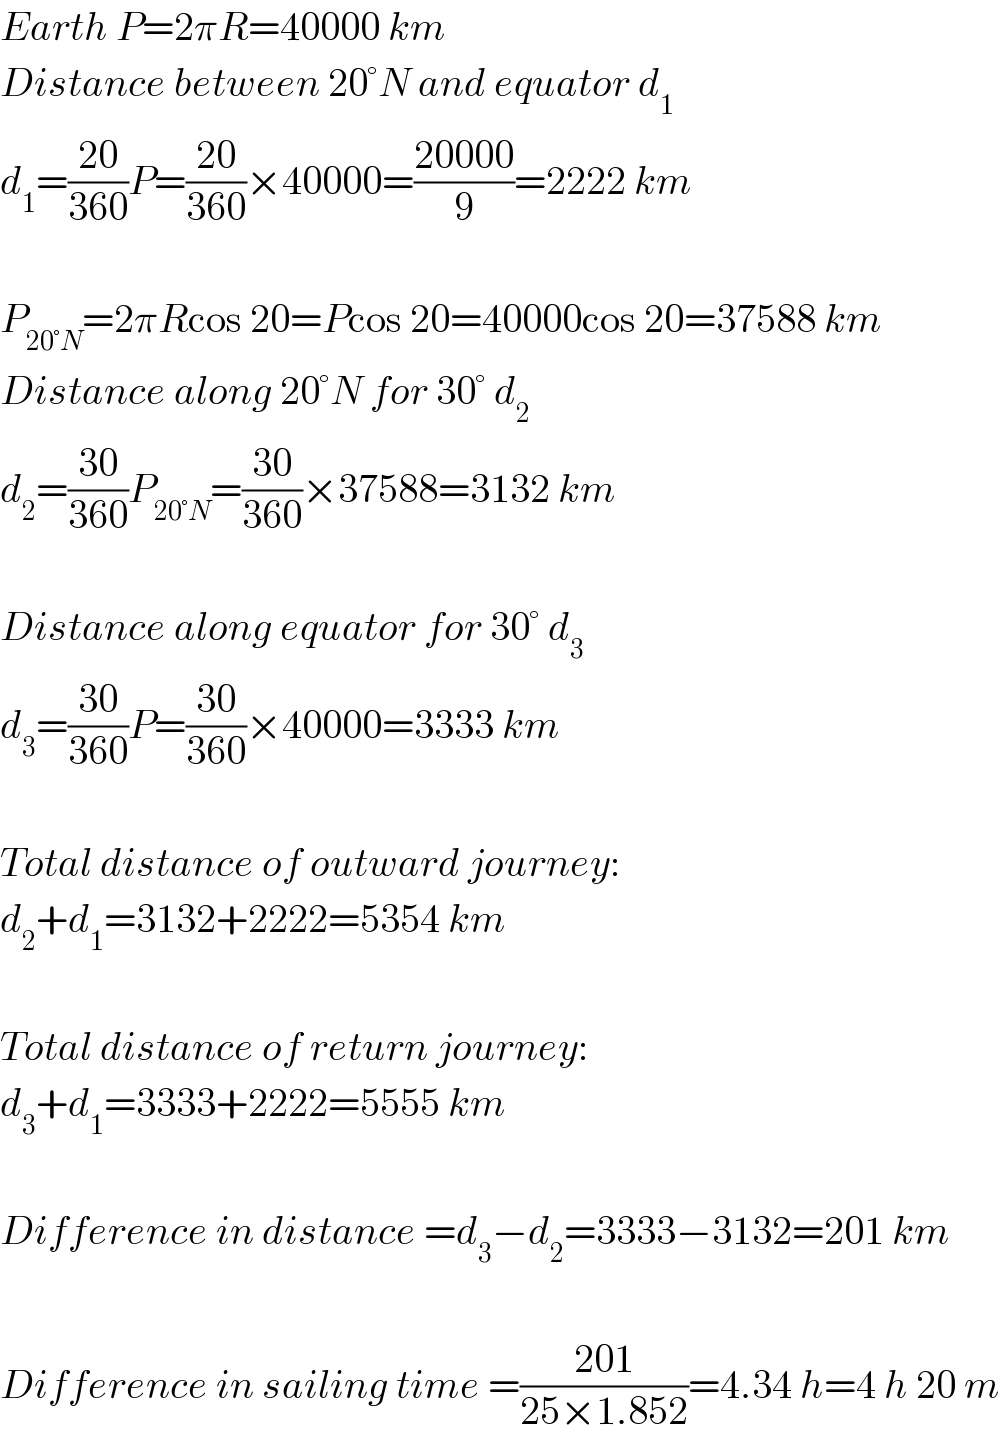 Earth P=2πR=40000 km  Distance between 20°N and equator d_1   d_1 =((20)/(360))P=((20)/(360))×40000=((20000)/9)=2222 km    P_(20°N) =2πRcos 20=Pcos 20=40000cos 20=37588 km  Distance along 20°N for 30° d_2   d_2 =((30)/(360))P_(20°N) =((30)/(360))×37588=3132 km    Distance along equator for 30° d_3   d_3 =((30)/(360))P=((30)/(360))×40000=3333 km    Total distance of outward journey:  d_2 +d_1 =3132+2222=5354 km    Total distance of return journey:  d_3 +d_1 =3333+2222=5555 km    Difference in distance =d_3 −d_2 =3333−3132=201 km    Difference in sailing time =((201)/(25×1.852))=4.34 h=4 h 20 m  